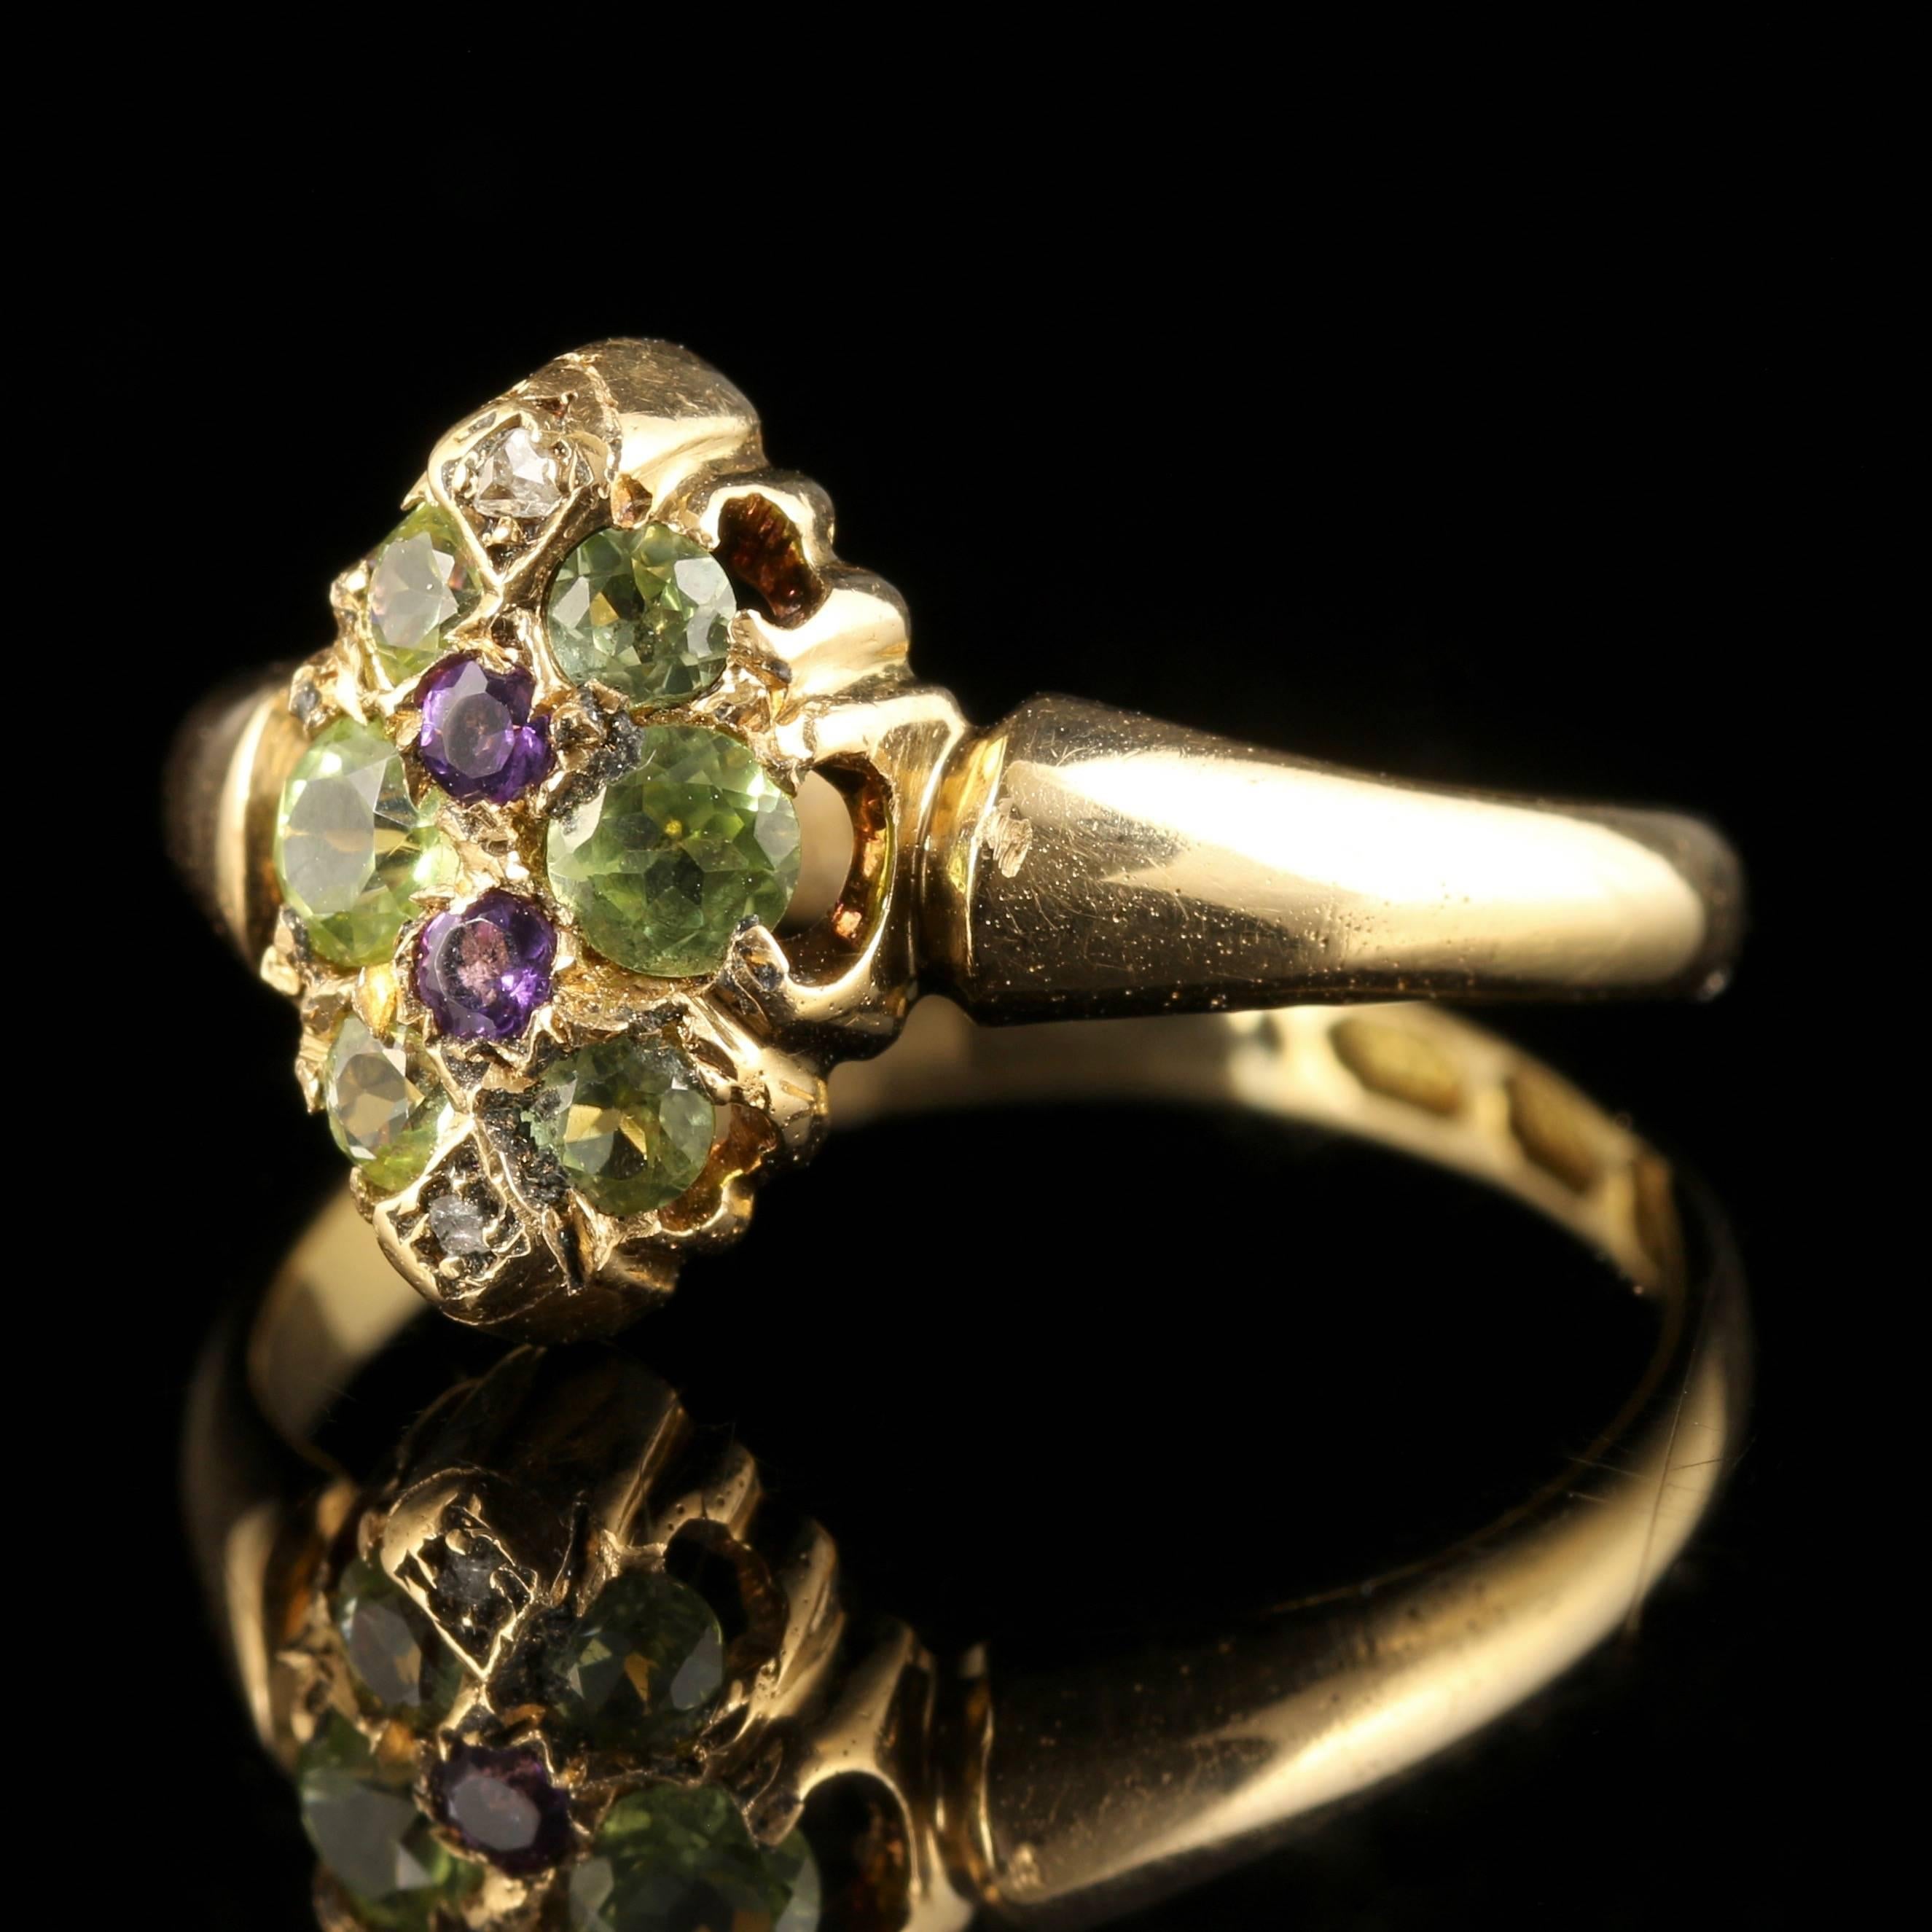 For more details please click continue reading down below...

This stunning Antique Victorian Suffragette ring is Circa 1900, set in 18ct Yellow Gold.

The face of the ring is a marquise shape displaying beautiful Peridots, Diamonds and